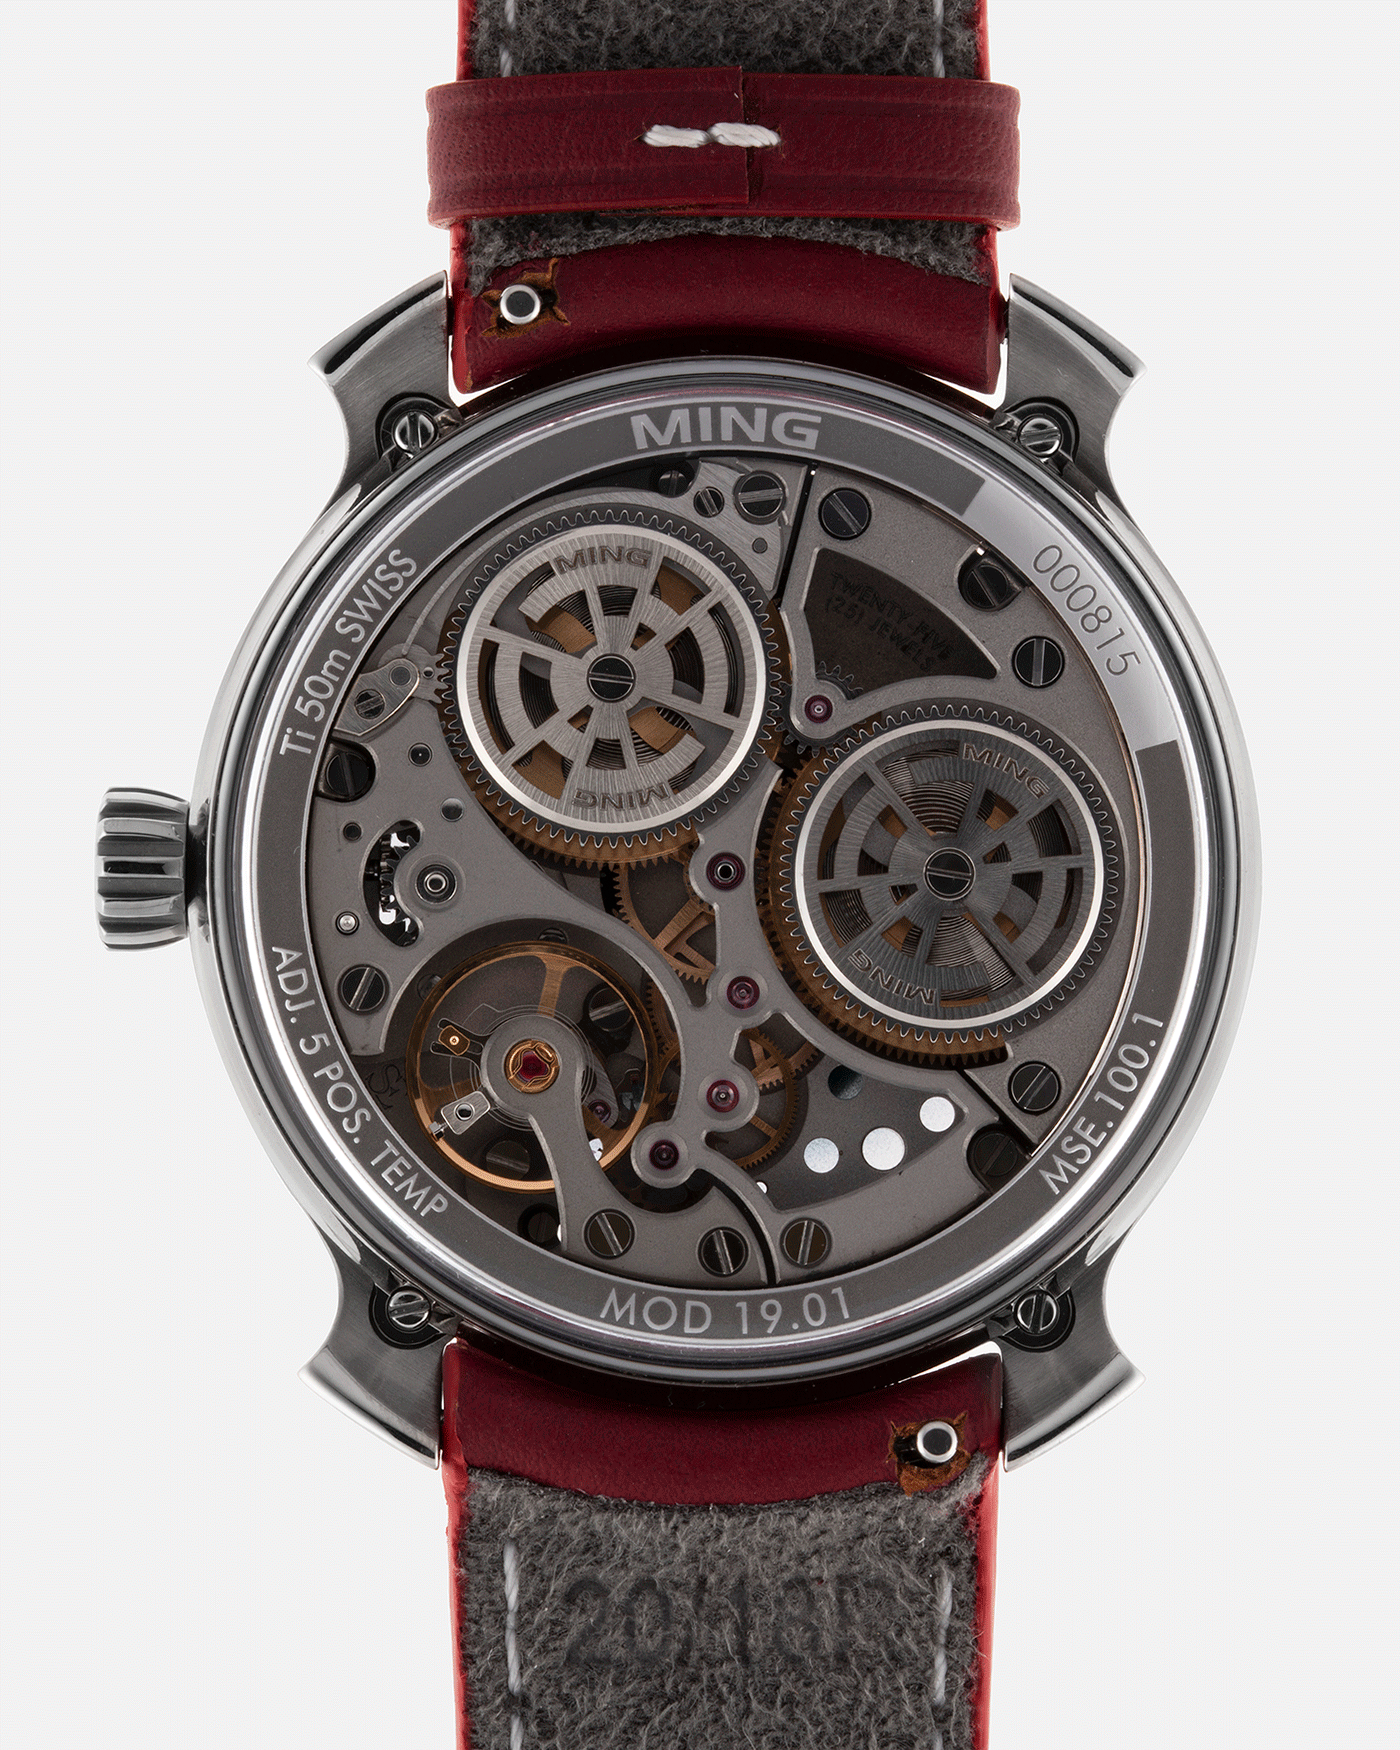 Brand: Ming Year: 2017 Model: 19.01 Material: Grade 5 Titanium Movement: Schwarz-Etienne for MING Cal. MSE100.1 Case Diameter: 39mm Strap: Ming / Jean Rousseau Red Leather Strap